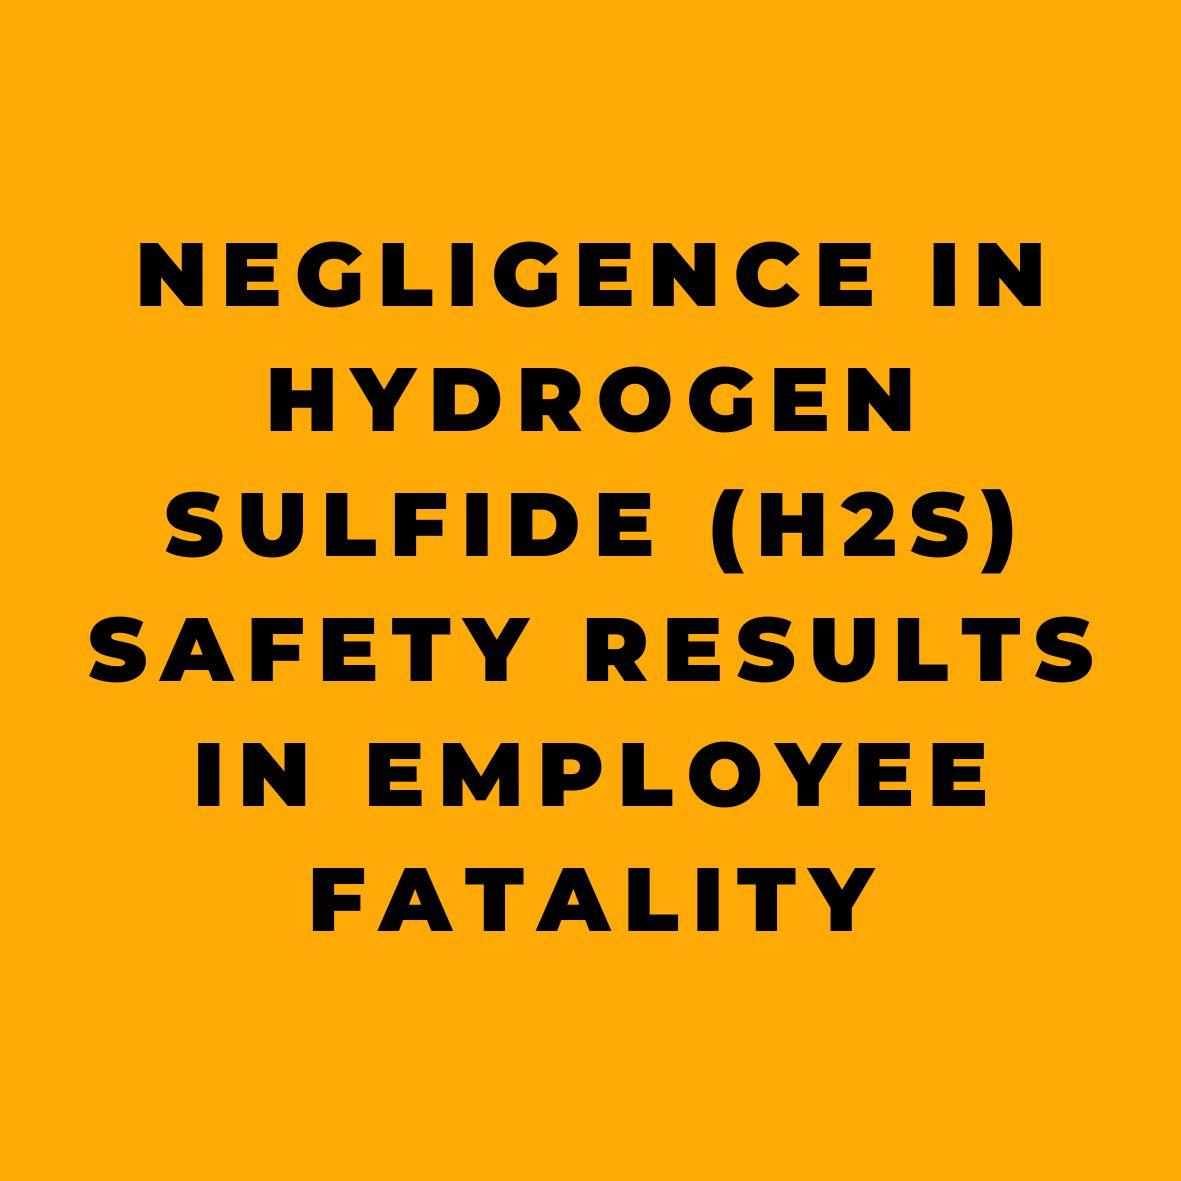 Negligence in Hydrogen Sulfide H2S Safety Results in Employee Fatality